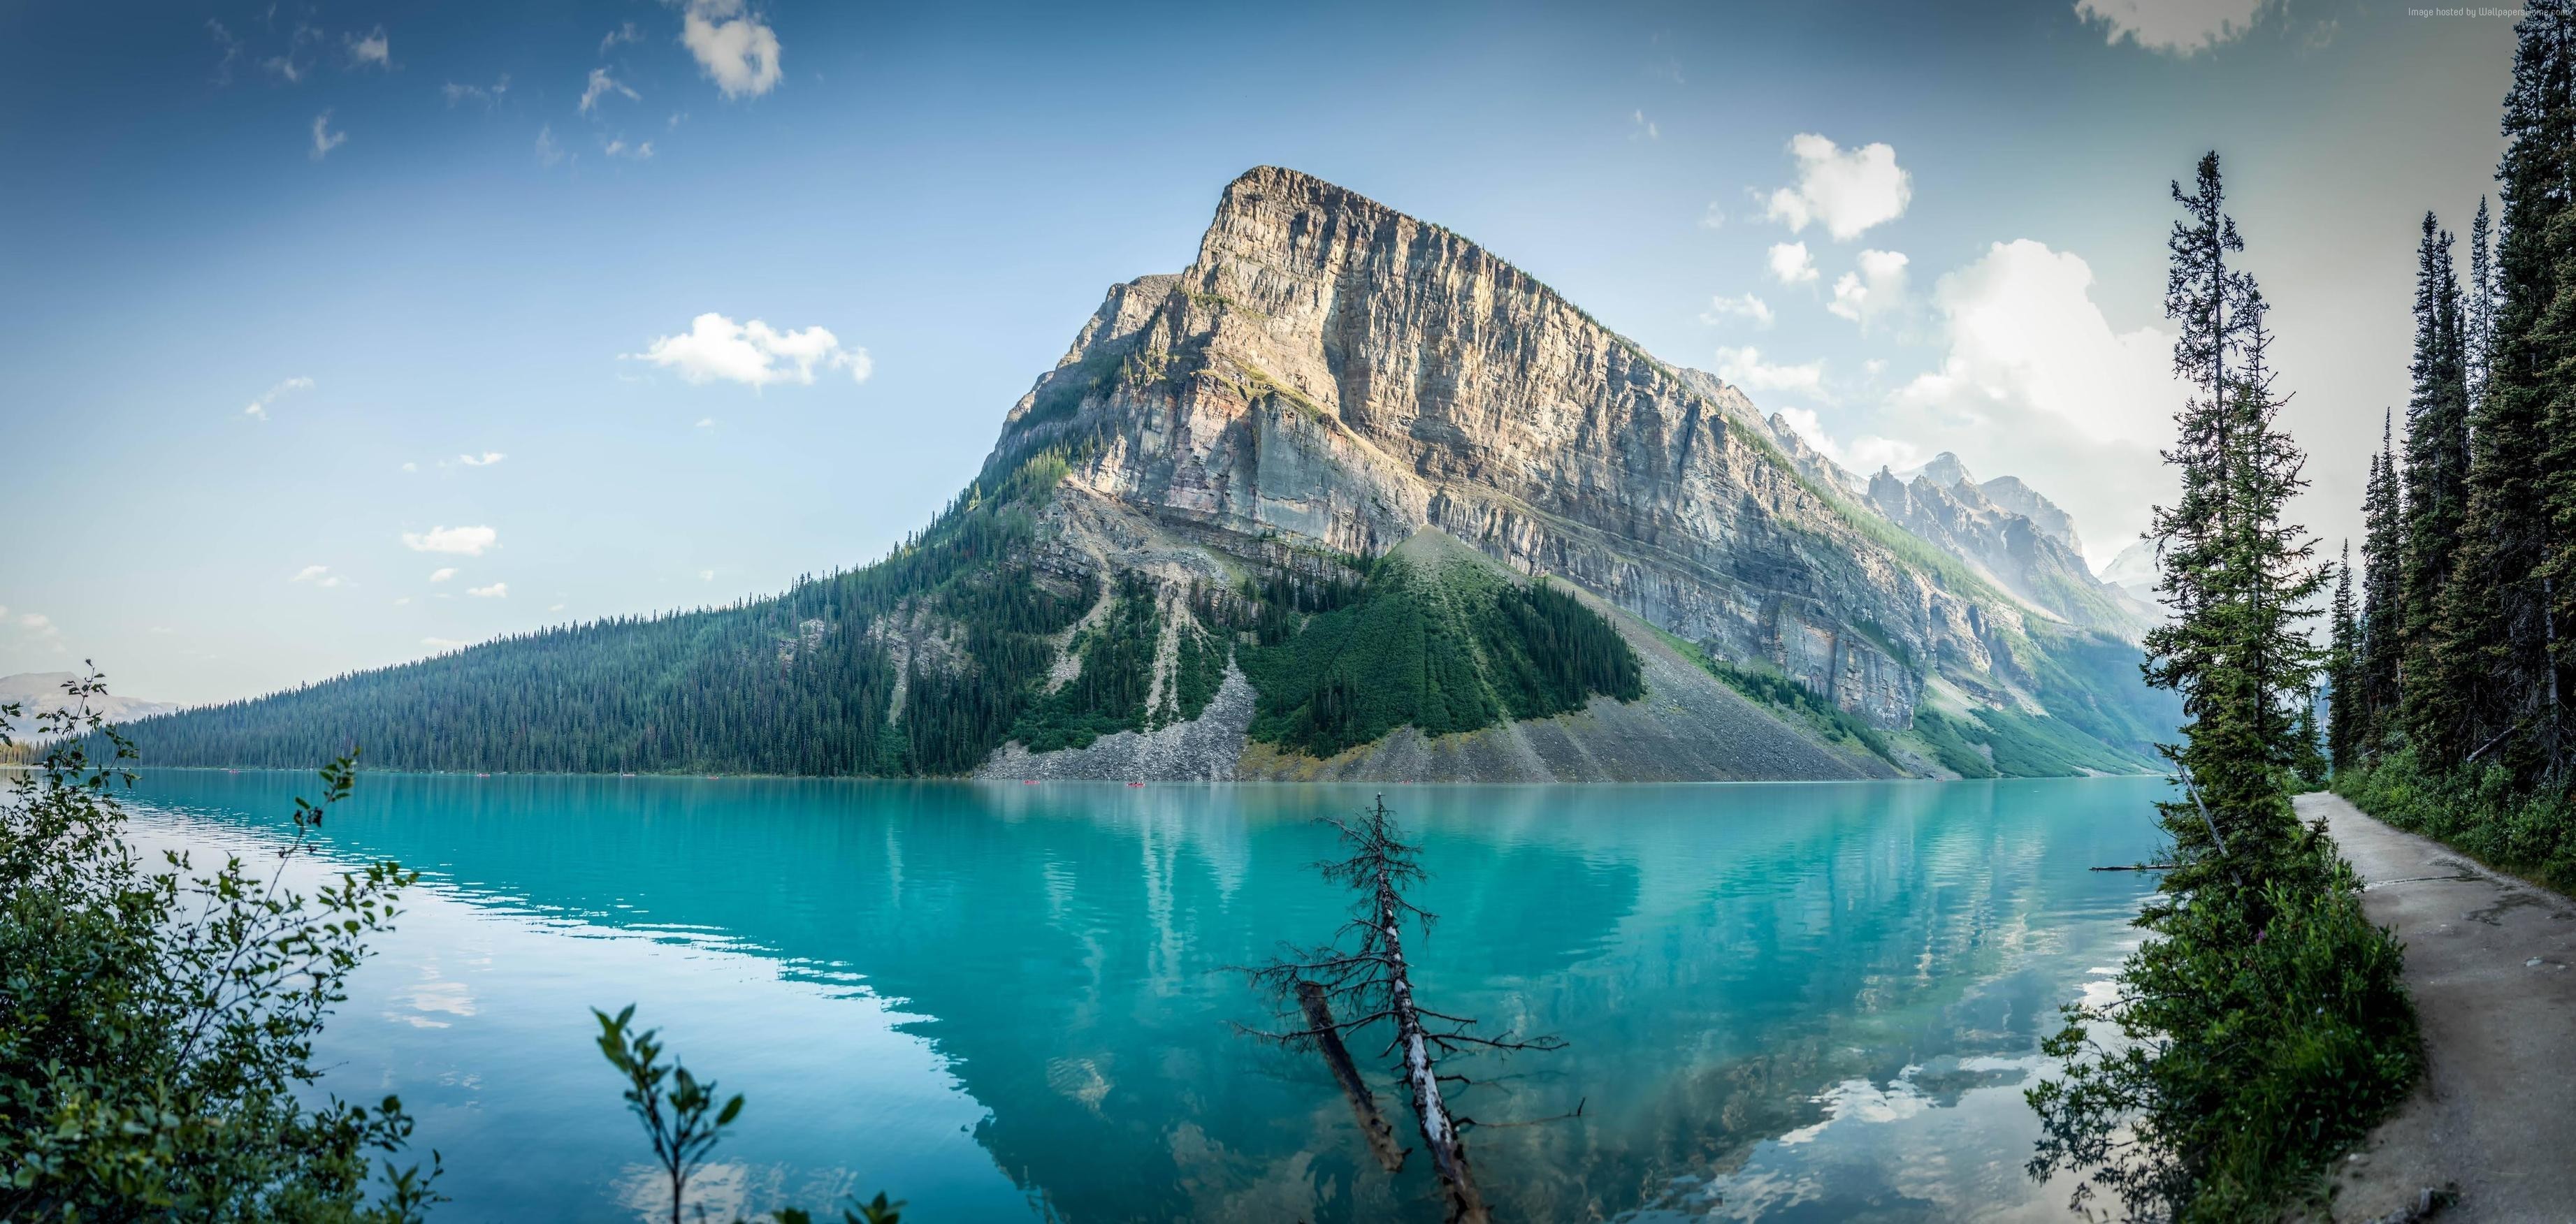 3686x1752 Your Resolution: 1024x1024. Available Resolutions: PC Mac Android iOS  Custom. Tags: Lake Louise ...